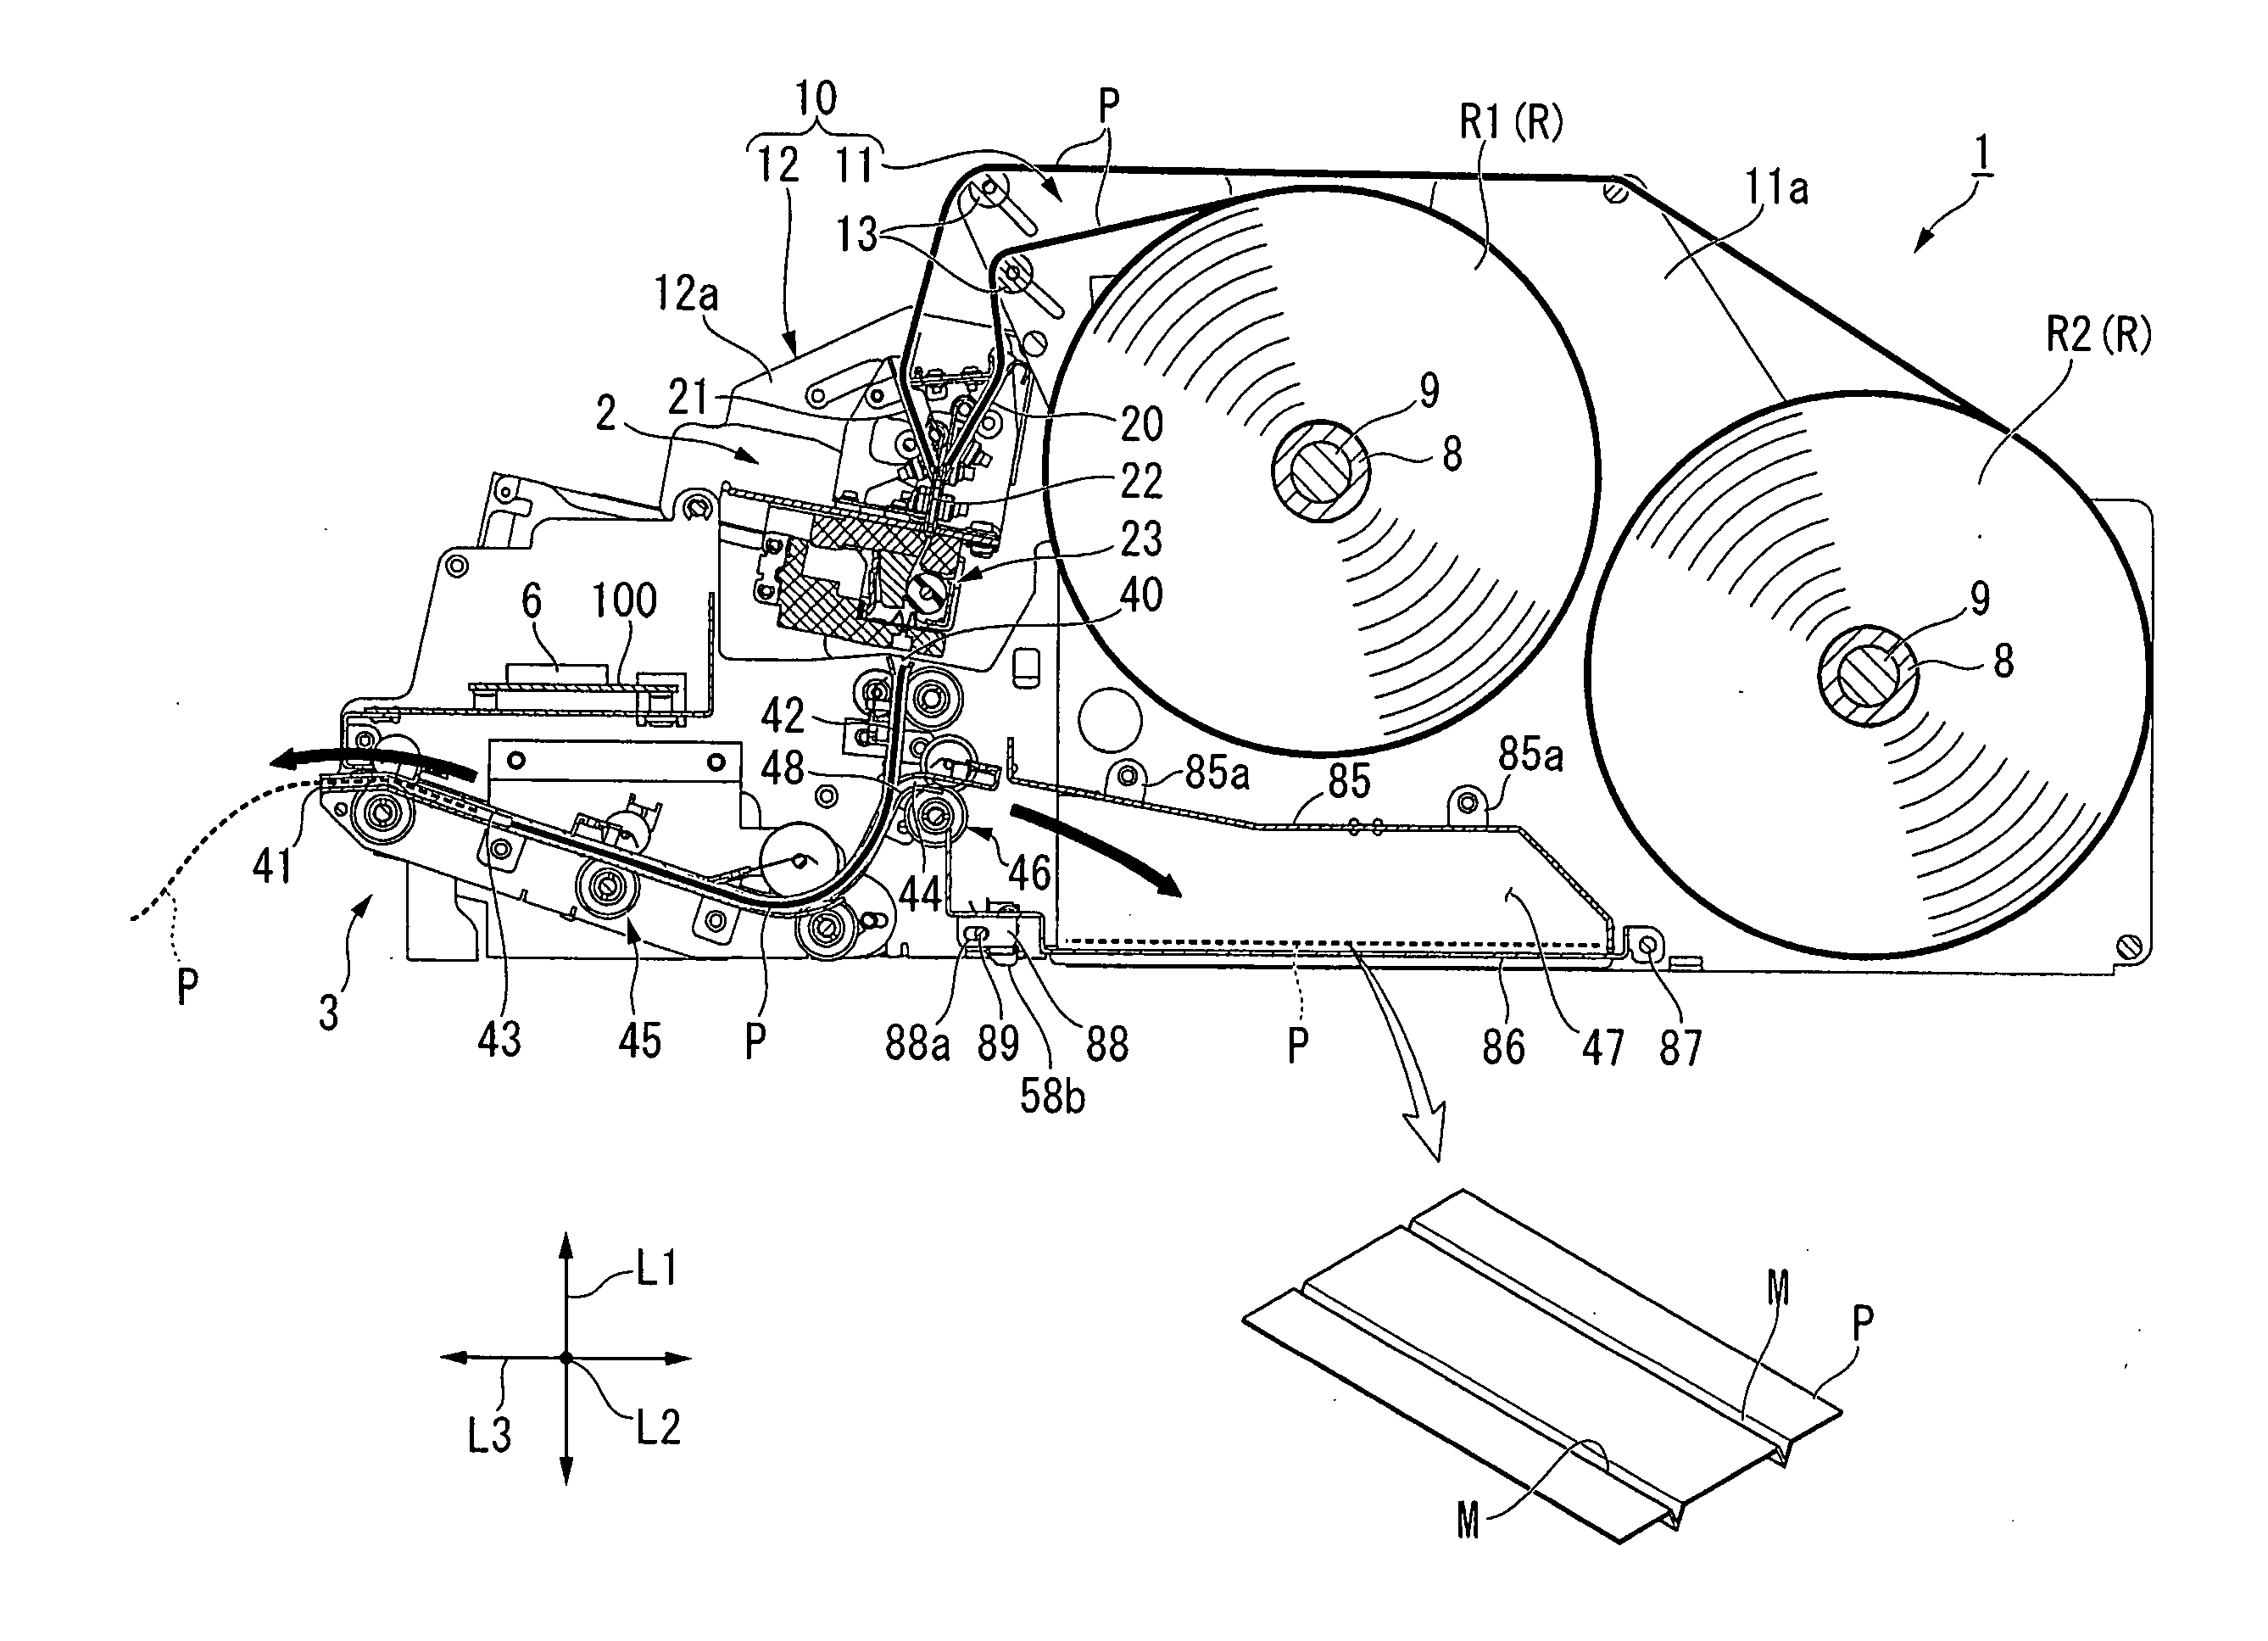 Paper discharge device